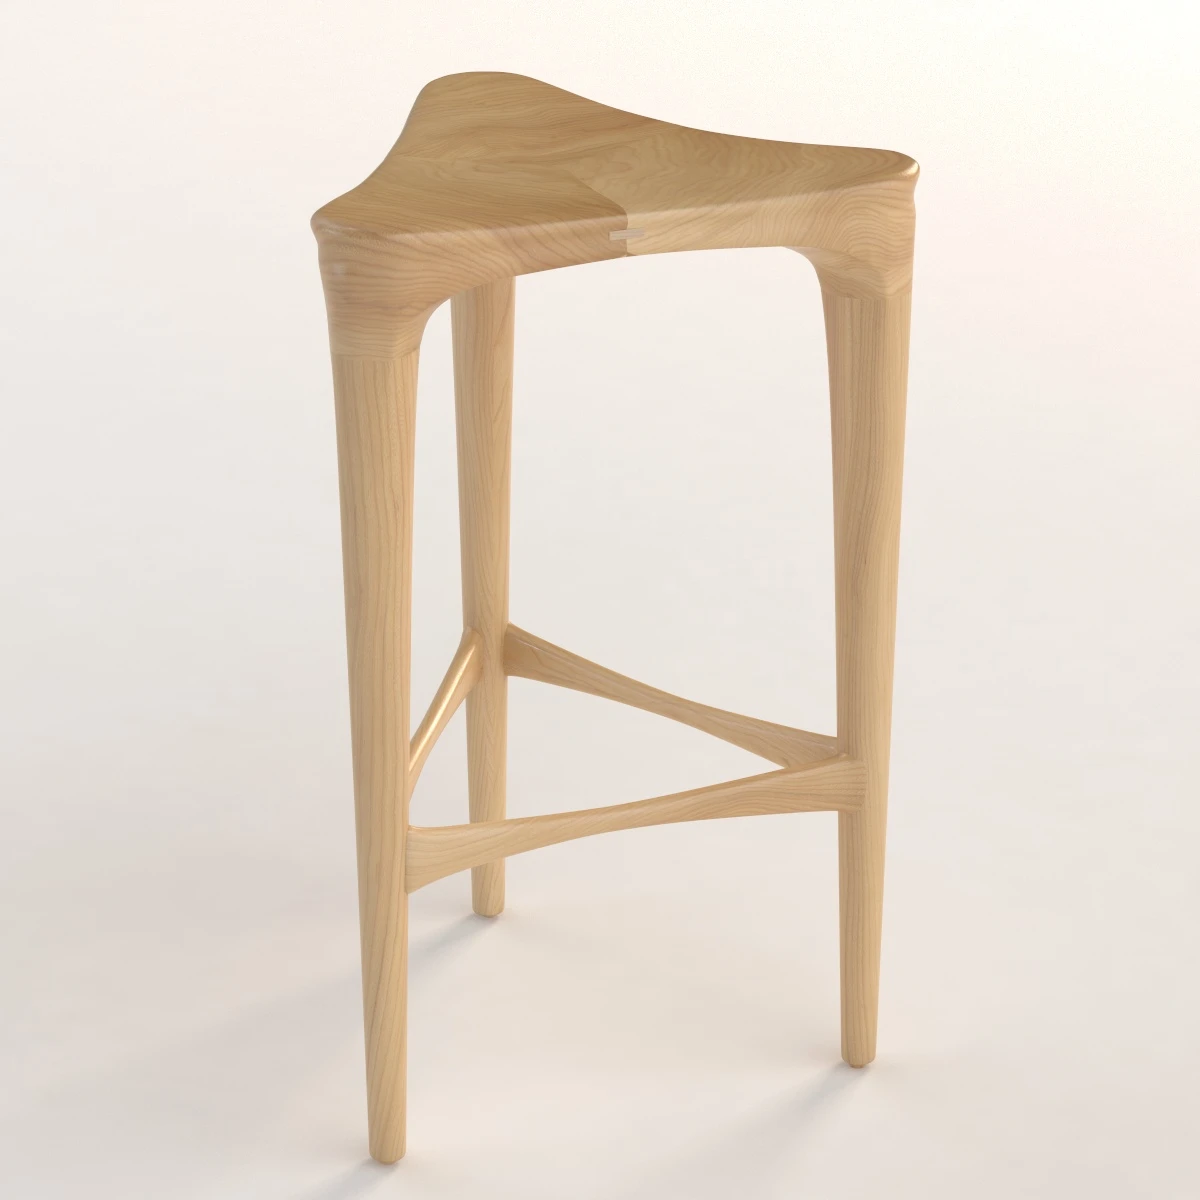 2 By 3 Wood Stools Geiger 3D Model_03